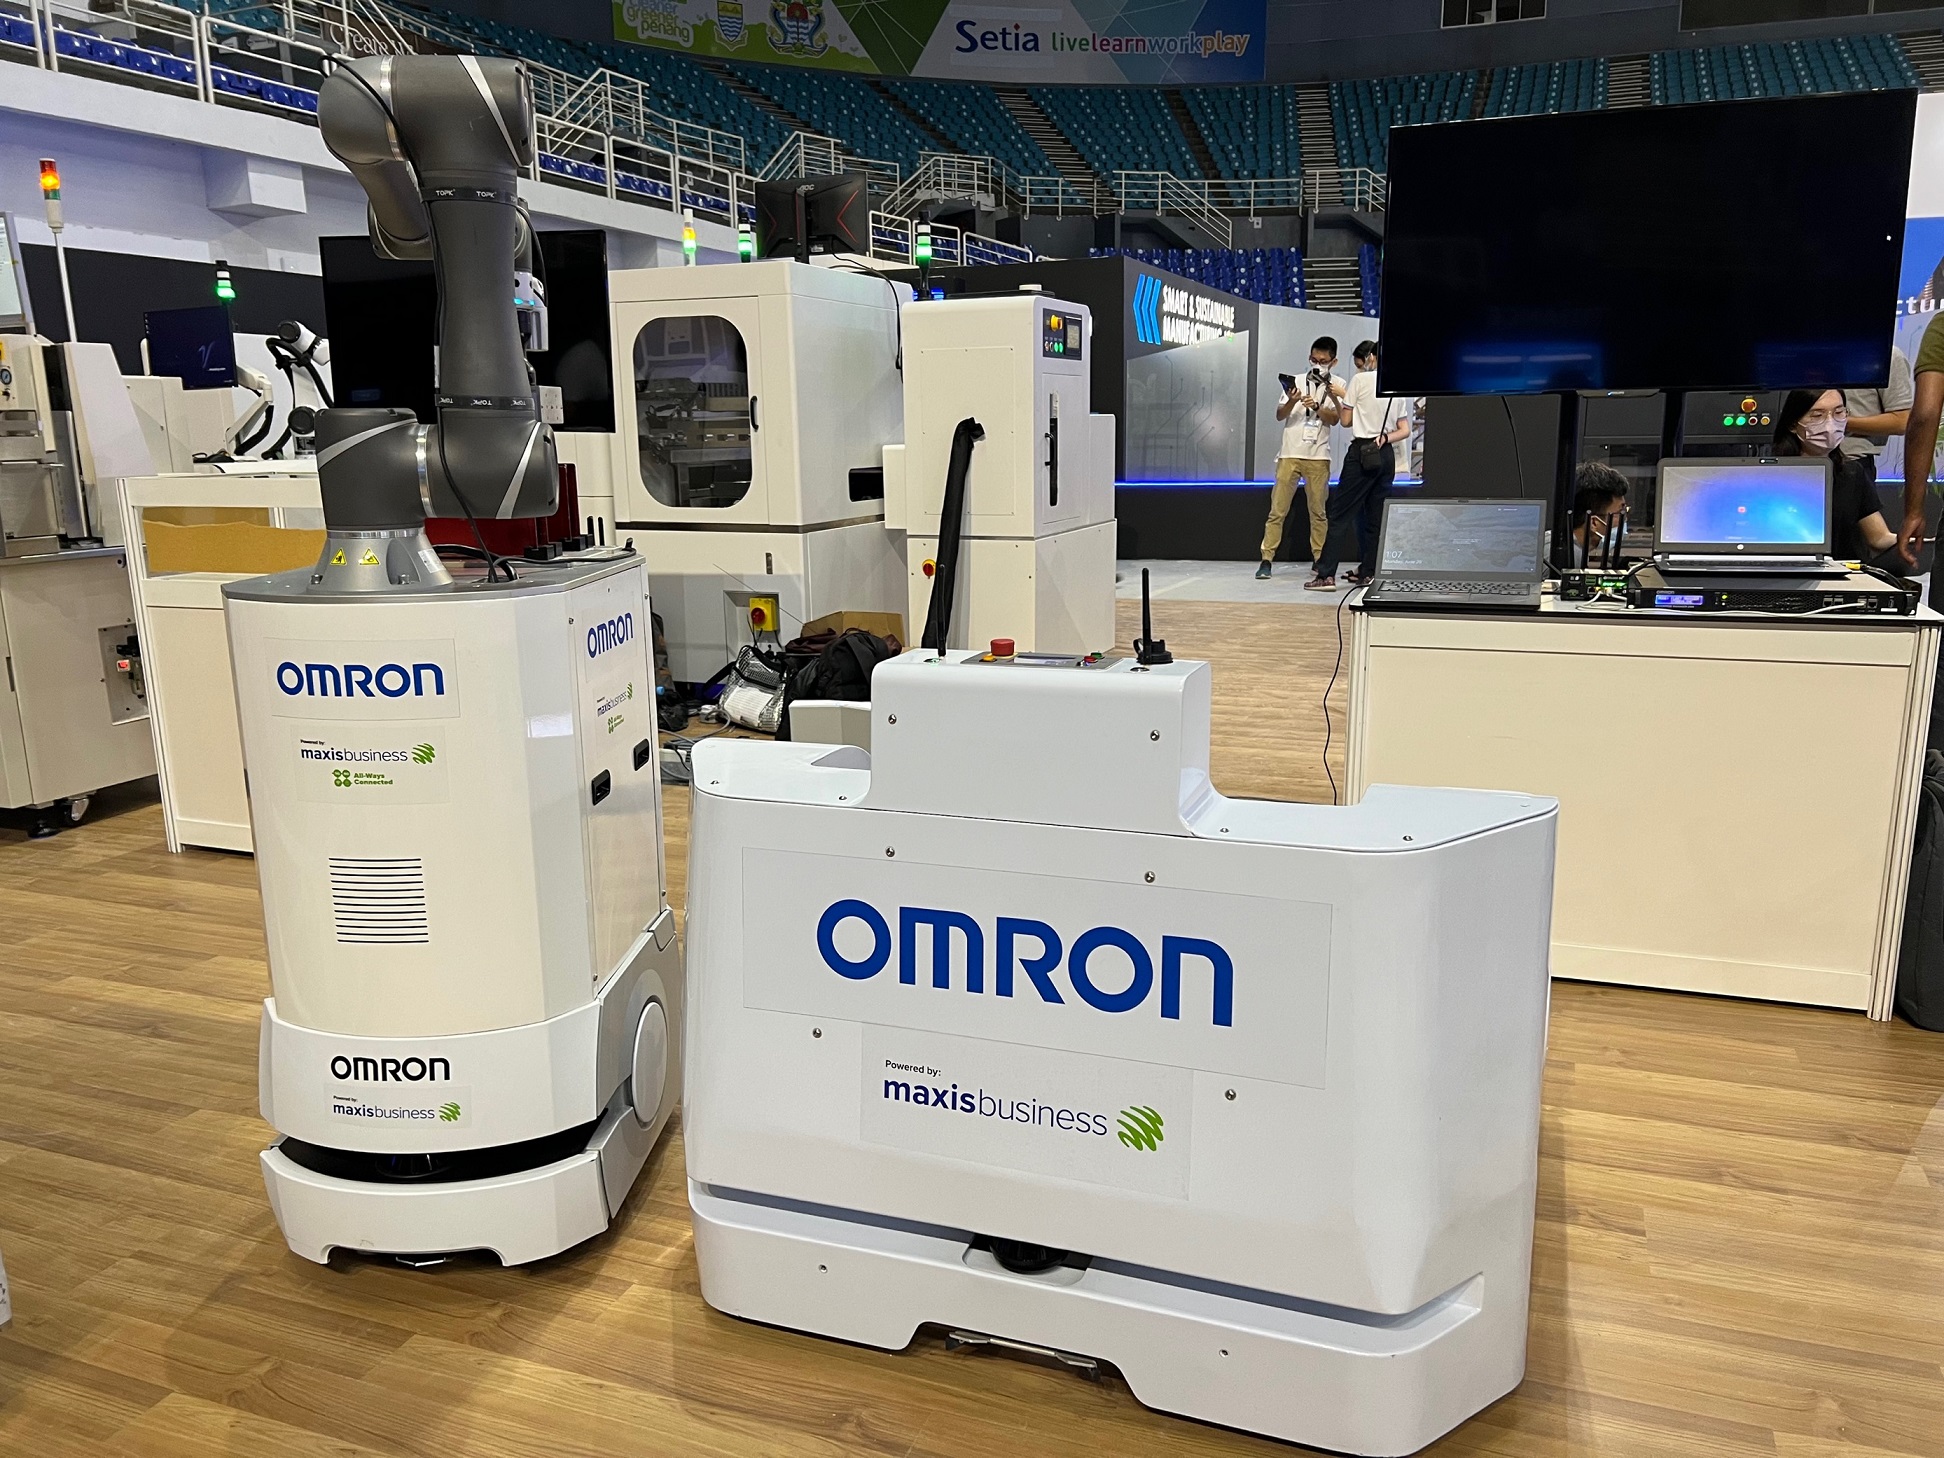 Maxis and Omron are showcasing Autonomous Mobile Robots powered by Maxis Business’ next generation network at Semicon Southeast Asia 2022